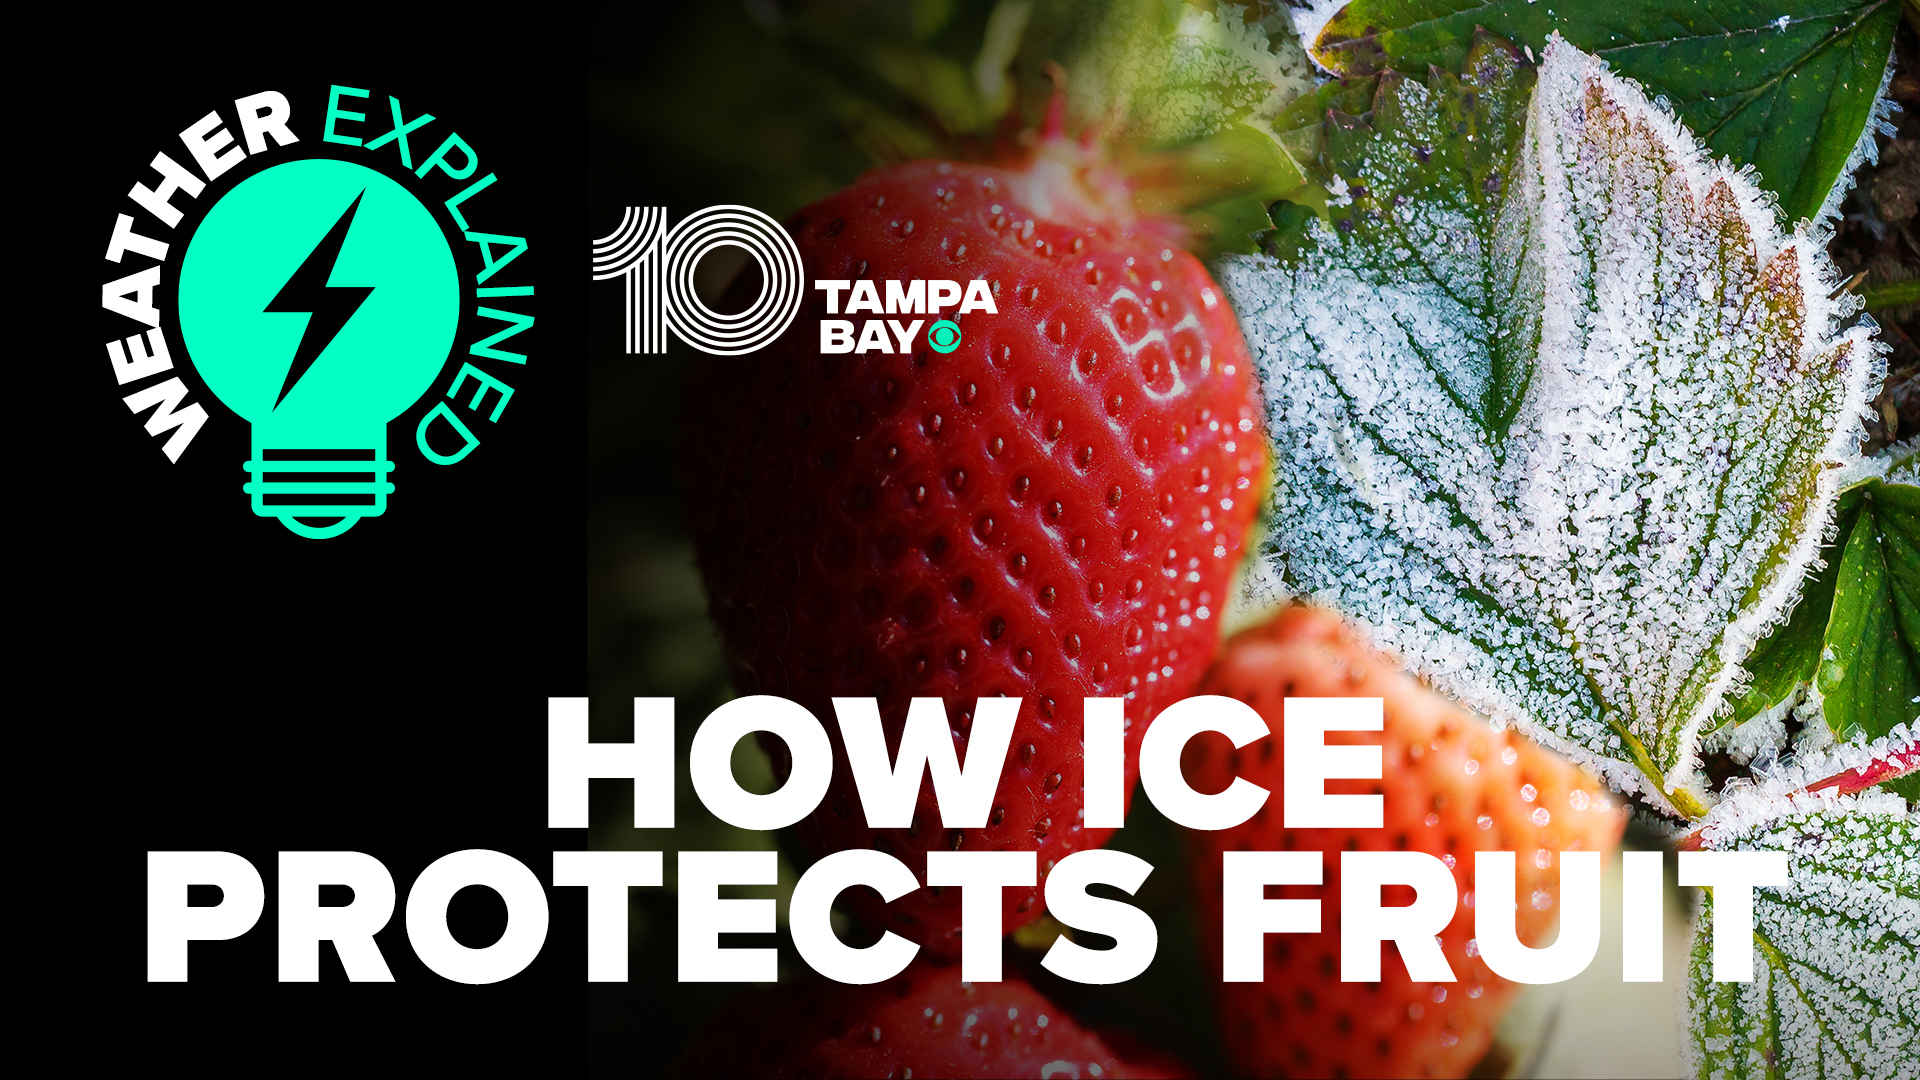 10 Tampa Bay chief meteorologist Bobby Deskins explains how farmers can use ice to their advantage during the colder months.